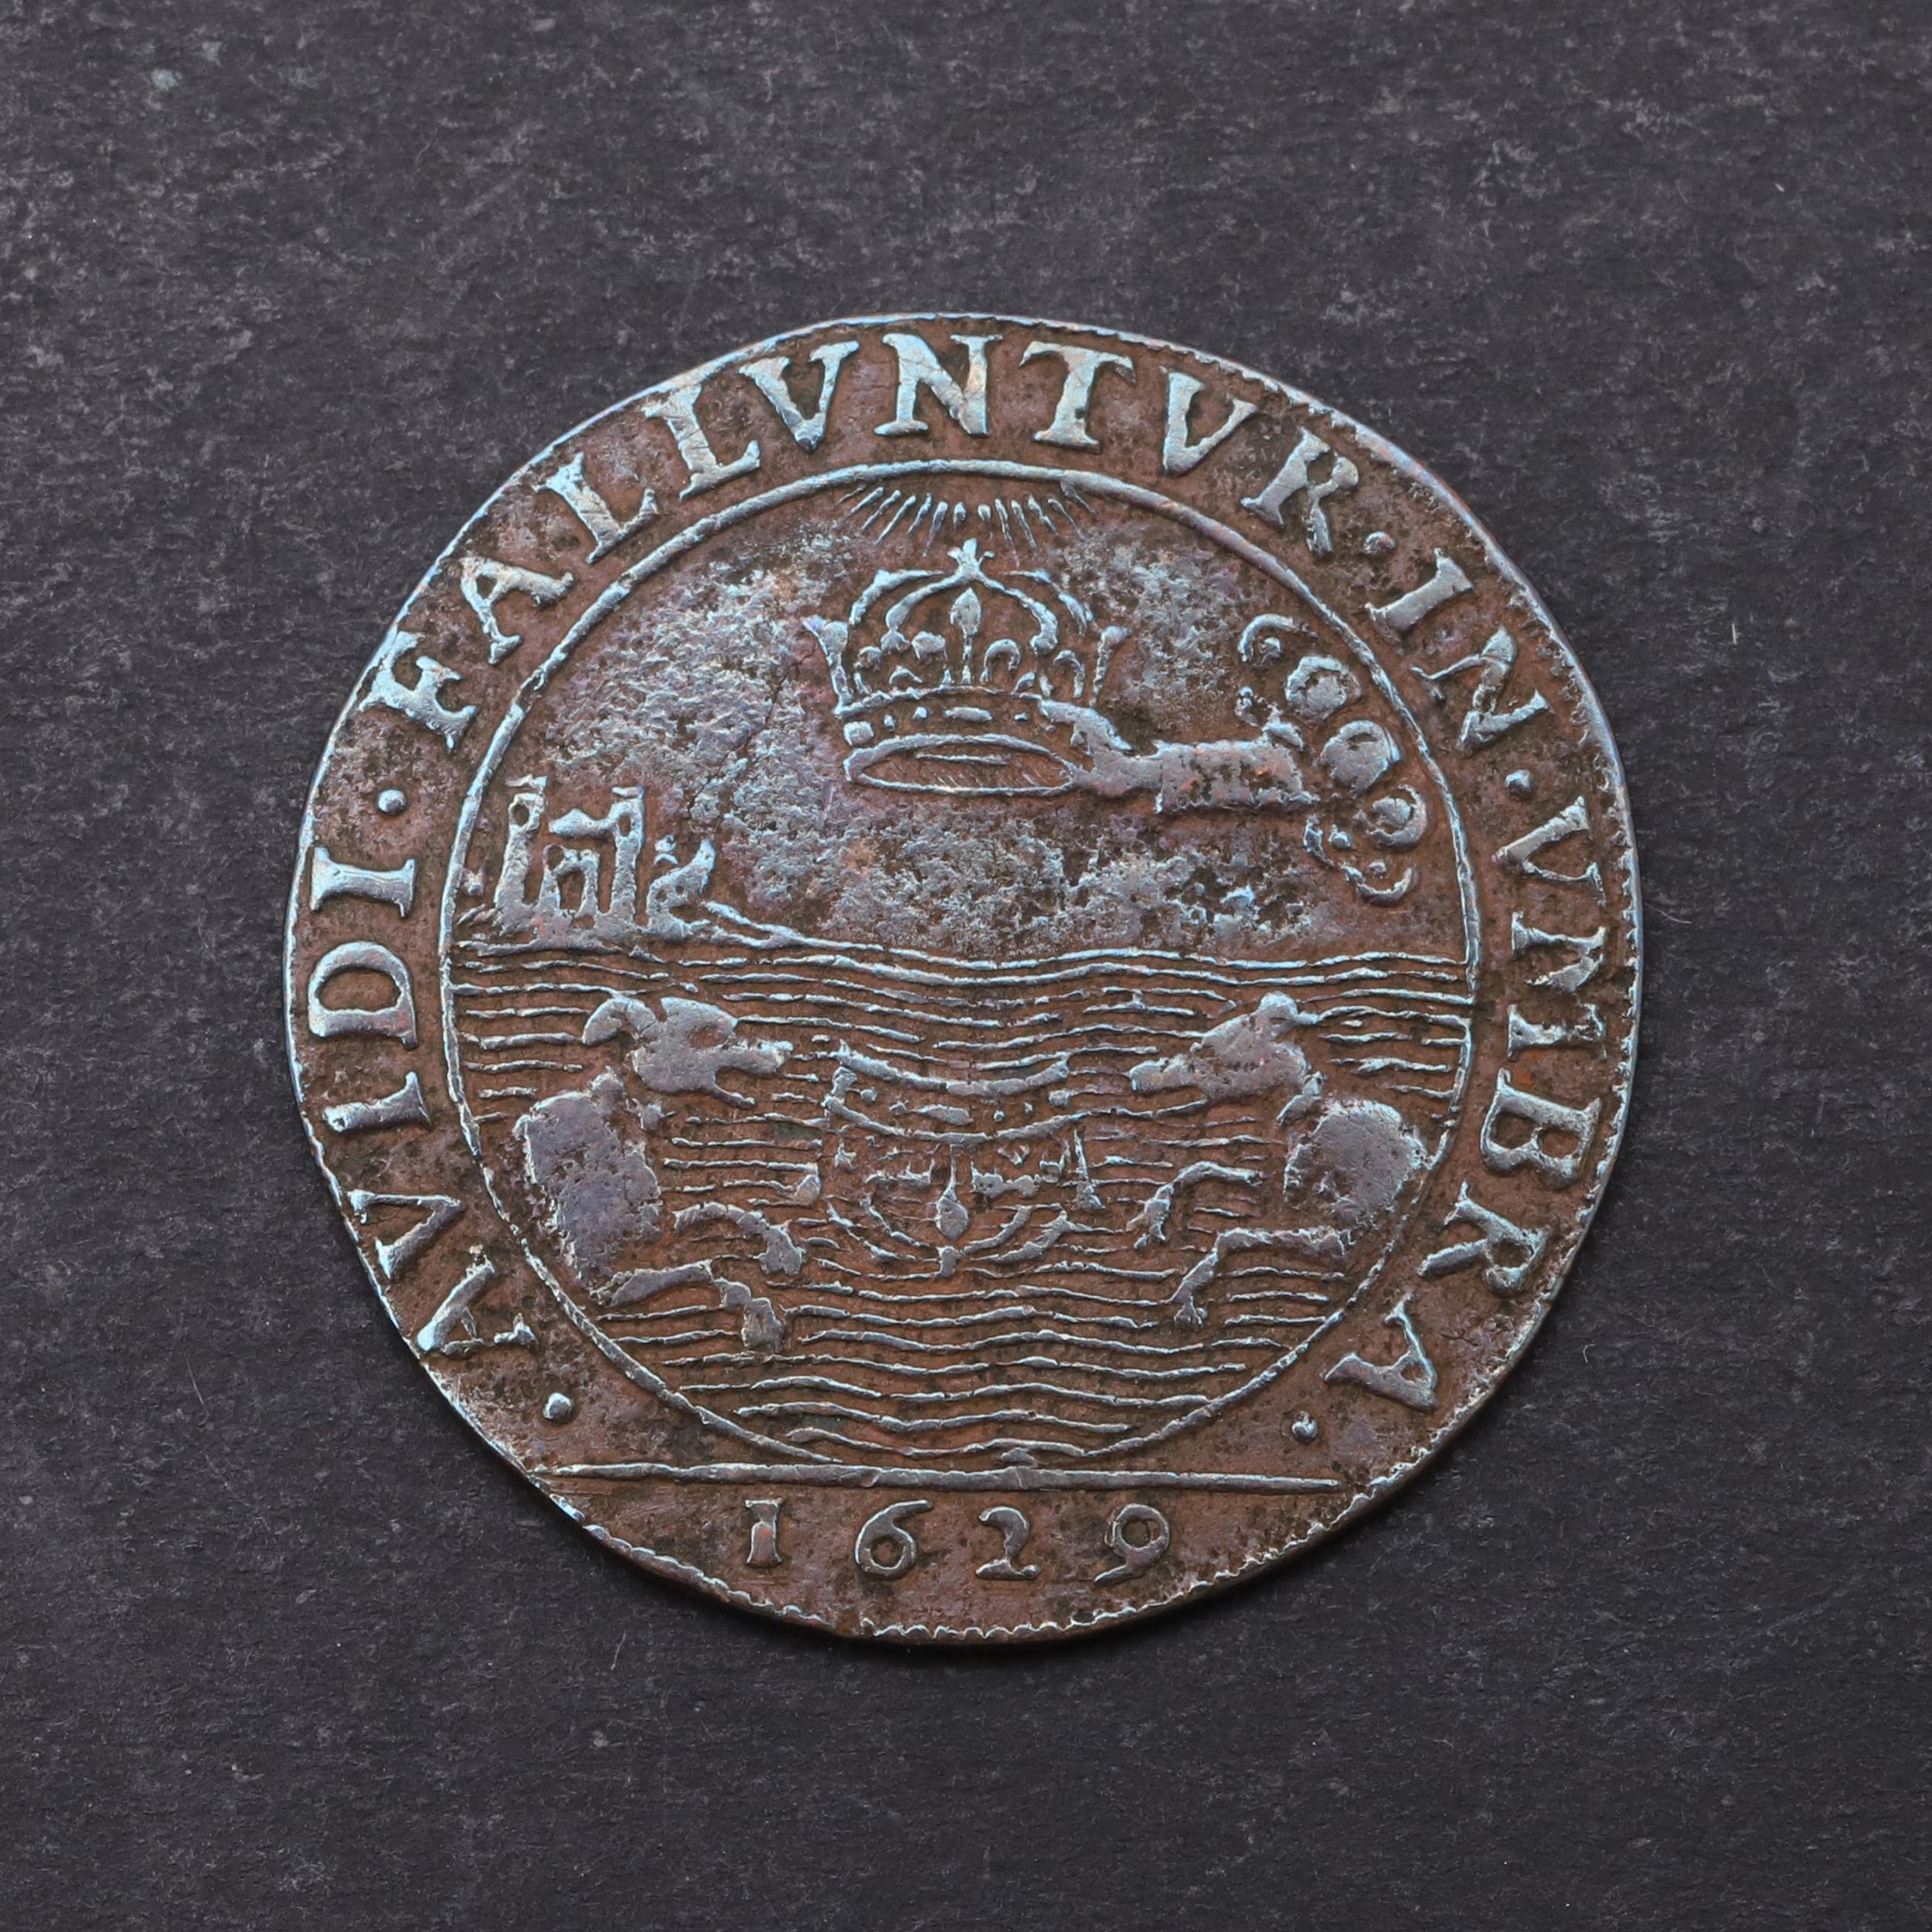 A SMALL MEDAL/TOKEN OF LOUIS XIII OF FRANCE, 1629.